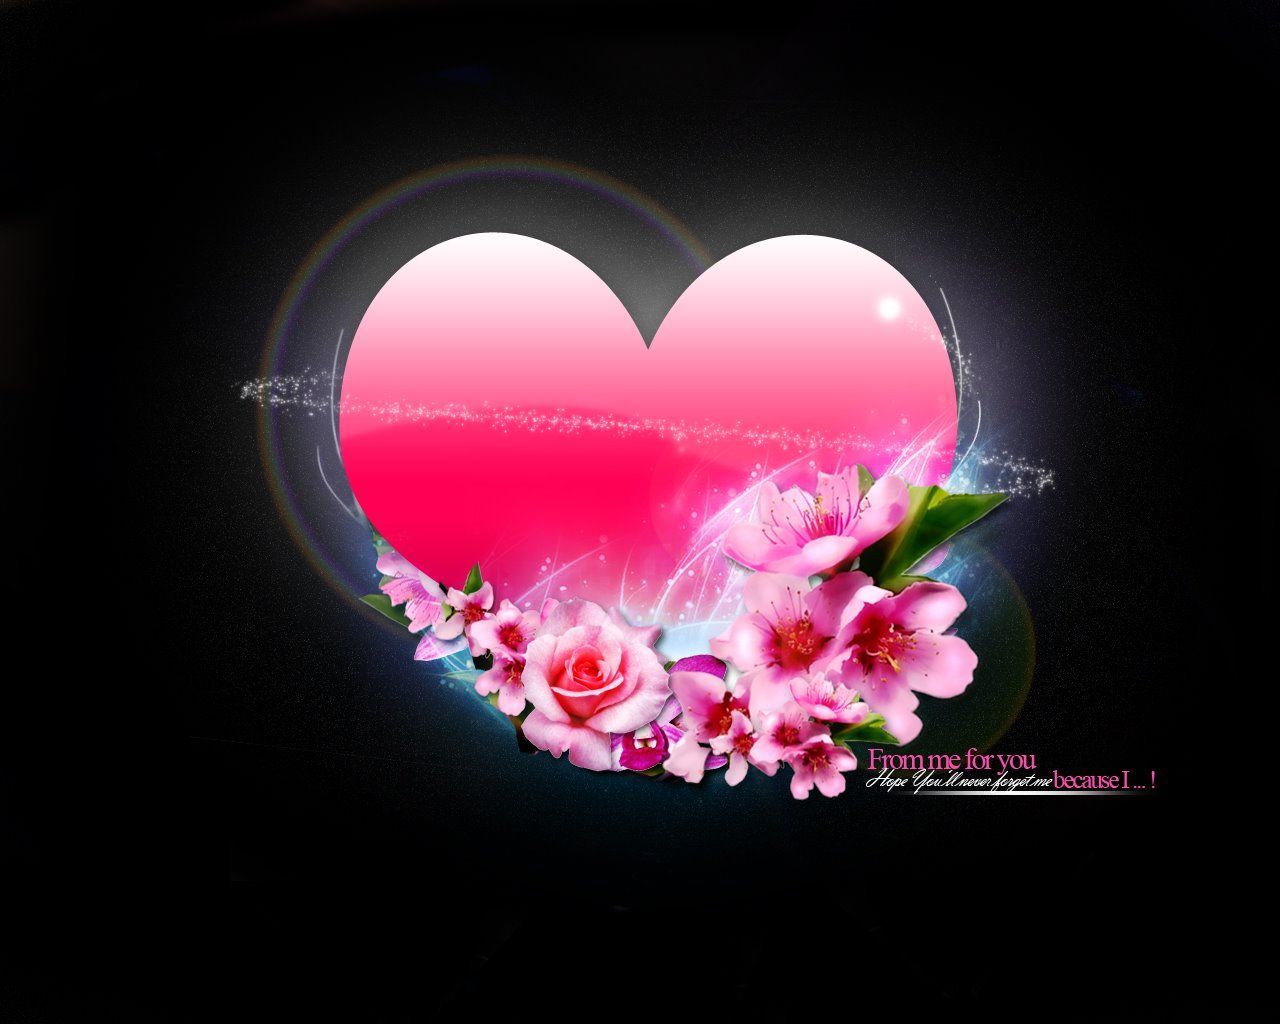 Lovely Hearts. shiny pink heart and lovely flowers wallpaper the darkness there. Lovely flowers wallpaper, Love wallpaper, Flower wallpaper